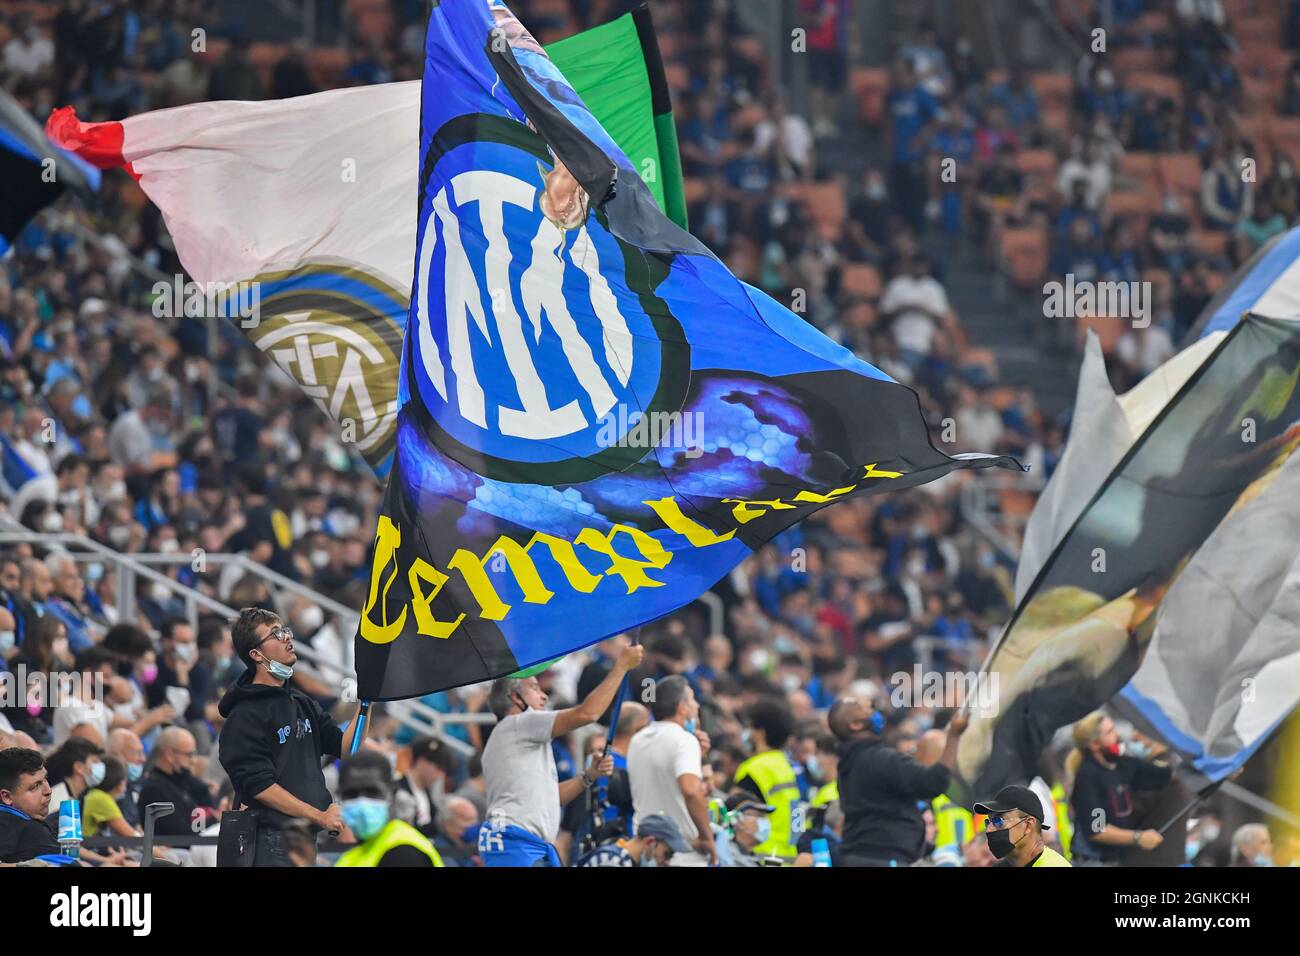 MILAN, ITALY, 25 SEPTEMBER, 2021: Fans of Internazionale during the Serie A match between FC Internazionale and Atalanta BC at Giuseppe Meazza stadium. Credit: Tommaso Fimiano/Medialys Images/Alamy Live News Stock Photo